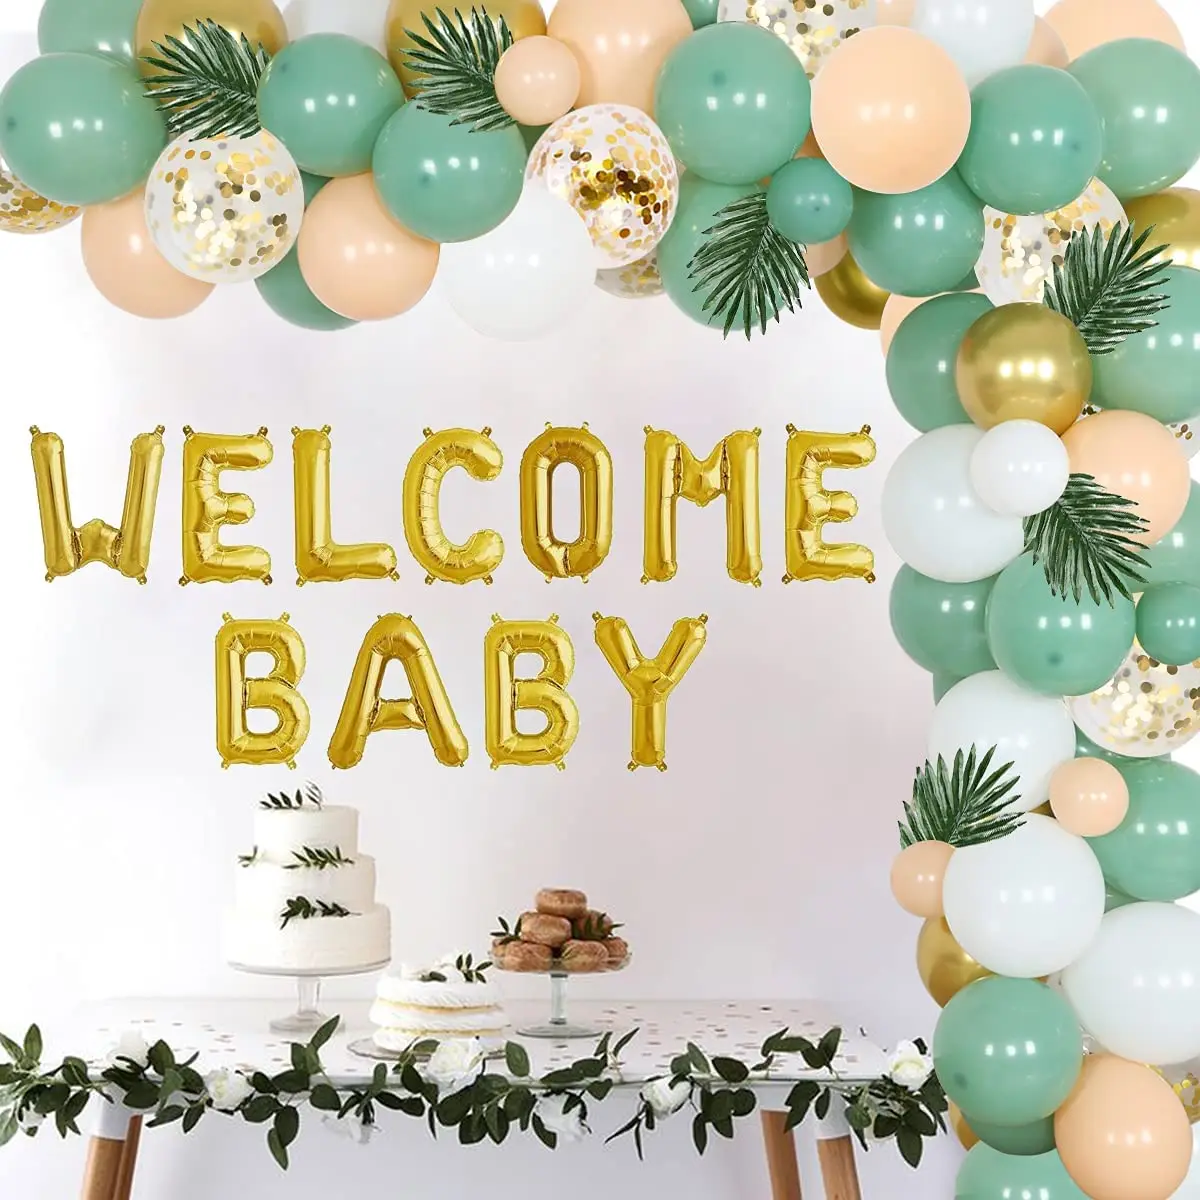 

Baby Shower Decorations Neutral Sage Green Gold Welcome Baby Foil Balloon Garland Arch Kit Baby Shower Party Supplies boy girl